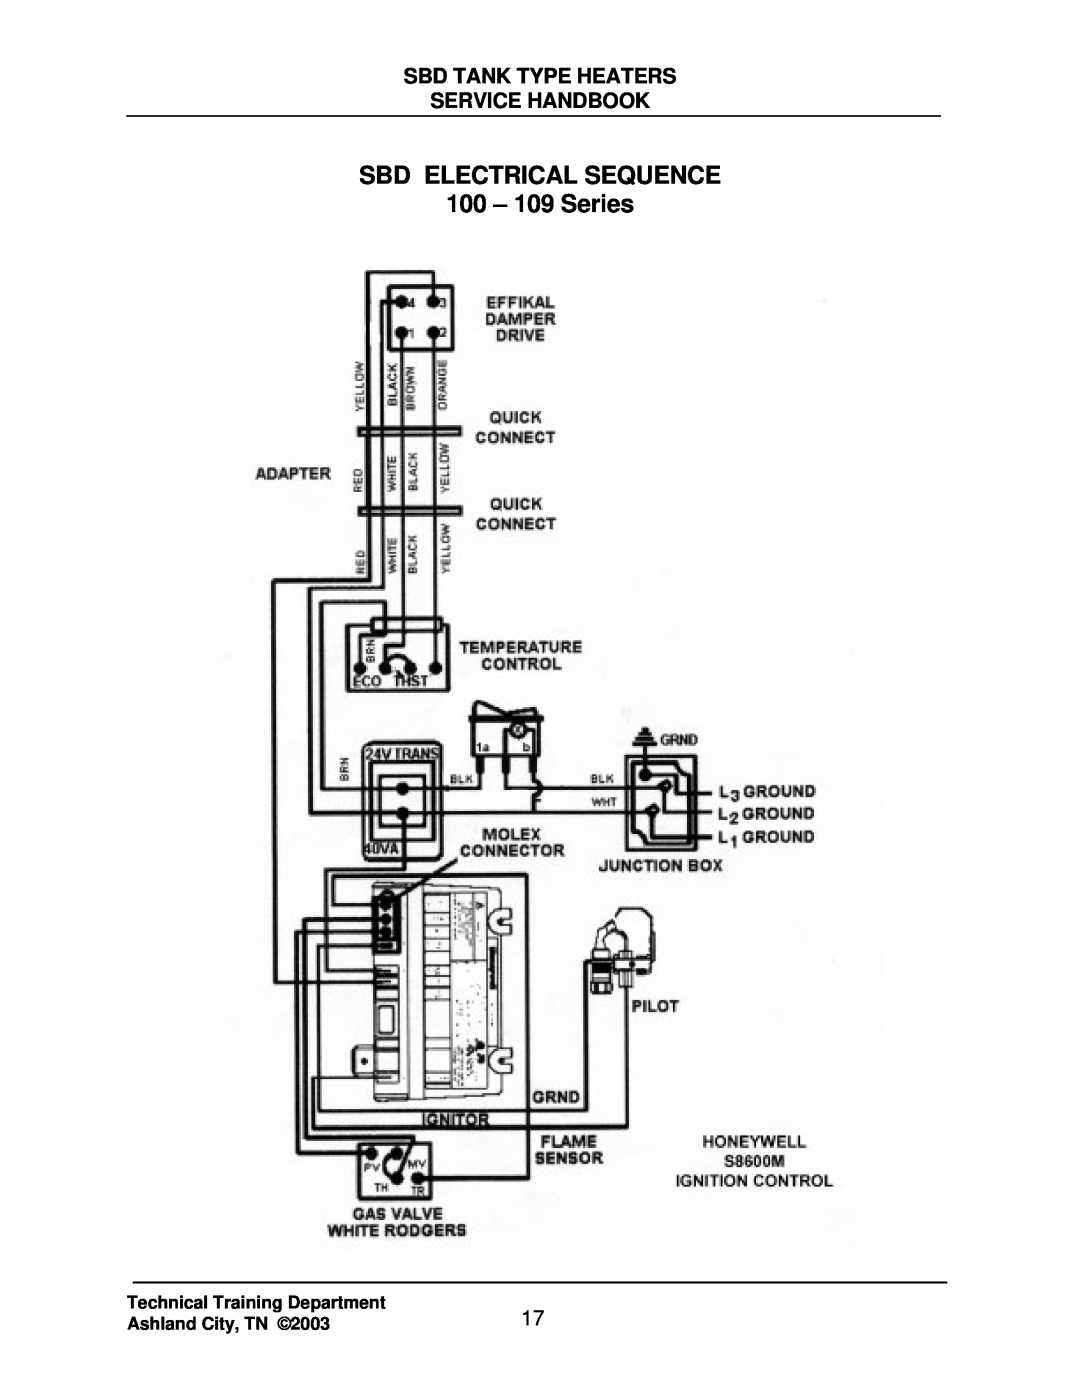 State Industries SBD85 500, SBD71 120 SBD ELECTRICAL SEQUENCE 100 - 109 Series, Sbd Tank Type Heaters Service Handbook 